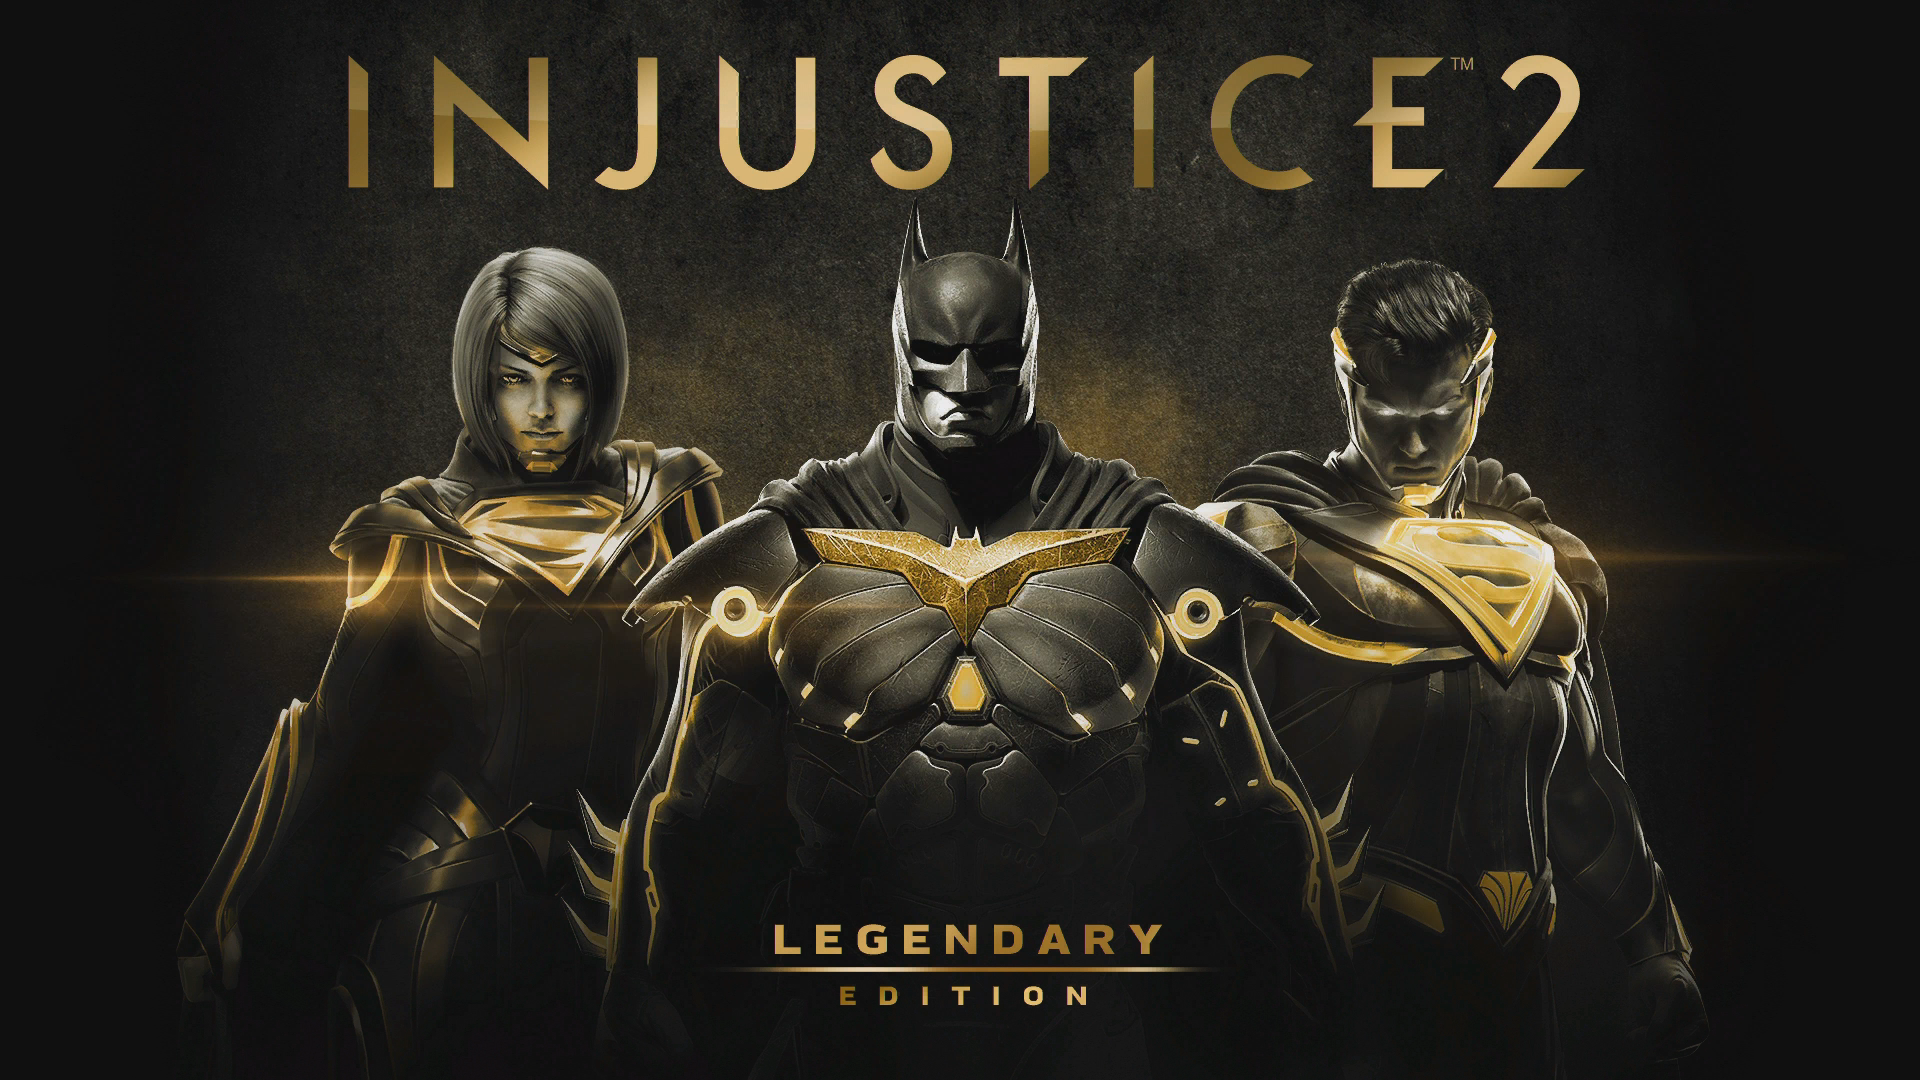 What Do You Get With Injustice 2 Legendary Edition